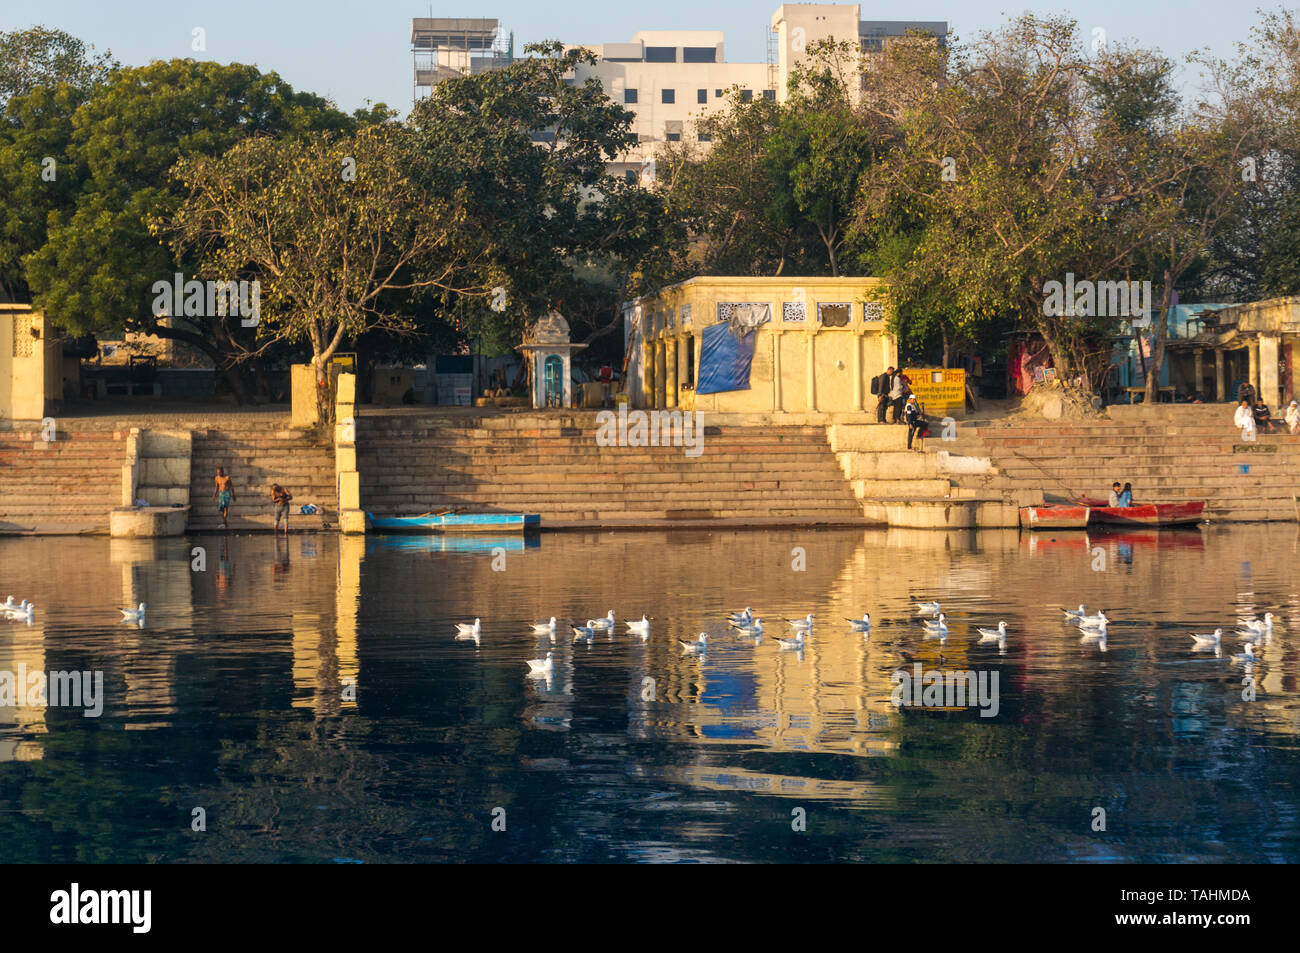 Delhi, India - circa 2019: Yellow temples and hindu buildings on the yamuna ghat bank in Delhi. This ghat near kashmiri gate is a popular tourist plac Stock Photo